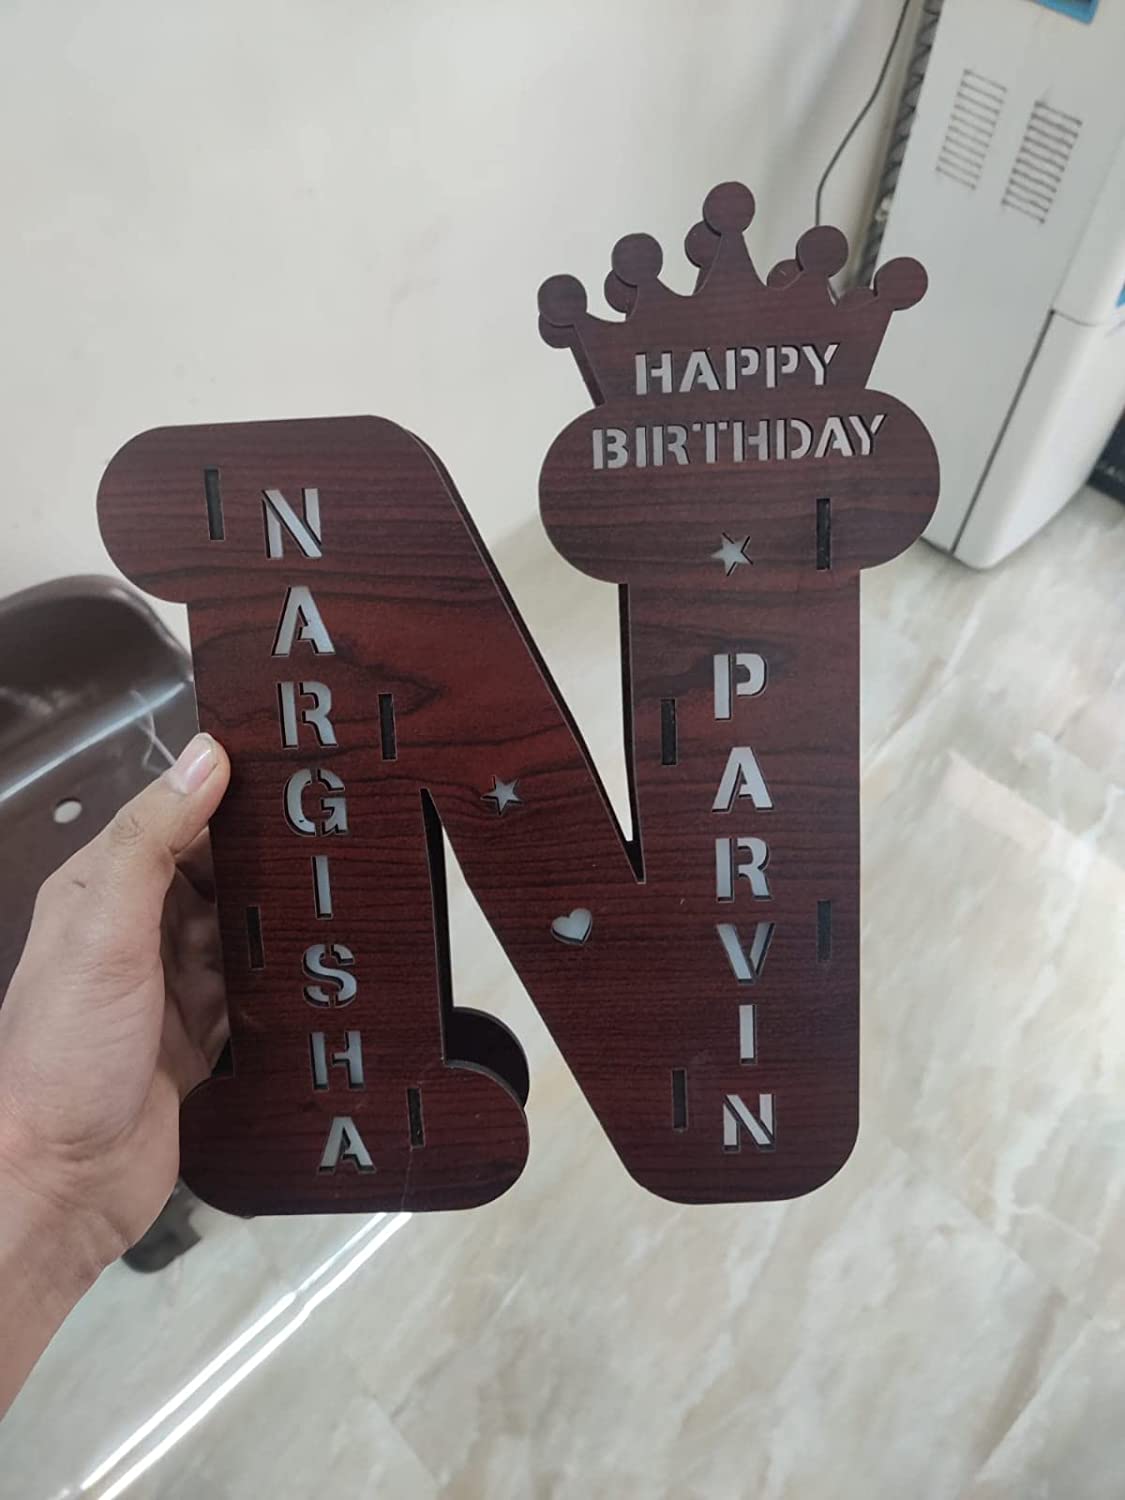 SHOPINSTA Wooden Alphabet Led Lamp Customized And Personalized With Any Alphabet(A-Z) Name And Date Amazing Gift 12X10X2 Inch (Brown, Pack of 1)